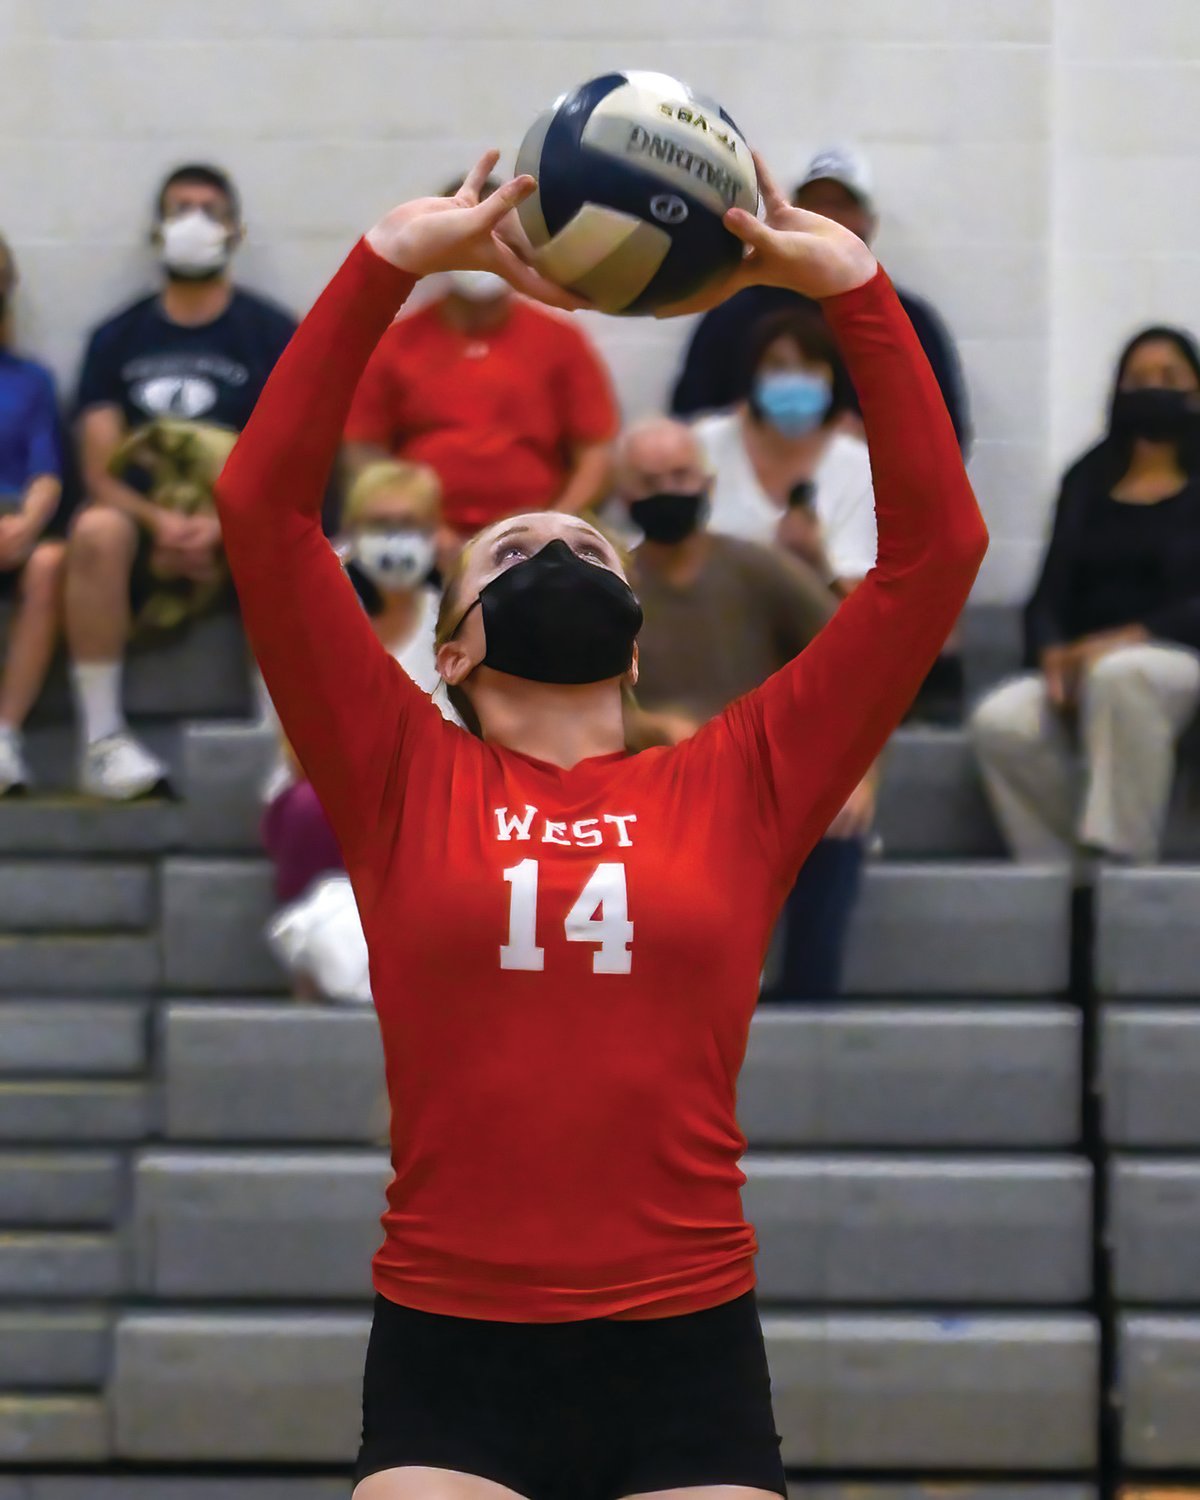 STRONG START: Cranston West’s MacKenzie Bessette returns a shot against rival Cranston East during the teams’ season opener. The Falcons would go on to sweep the Bolts in three sets and later beat
Mount St. Charles the following
match to improve to
2-0.